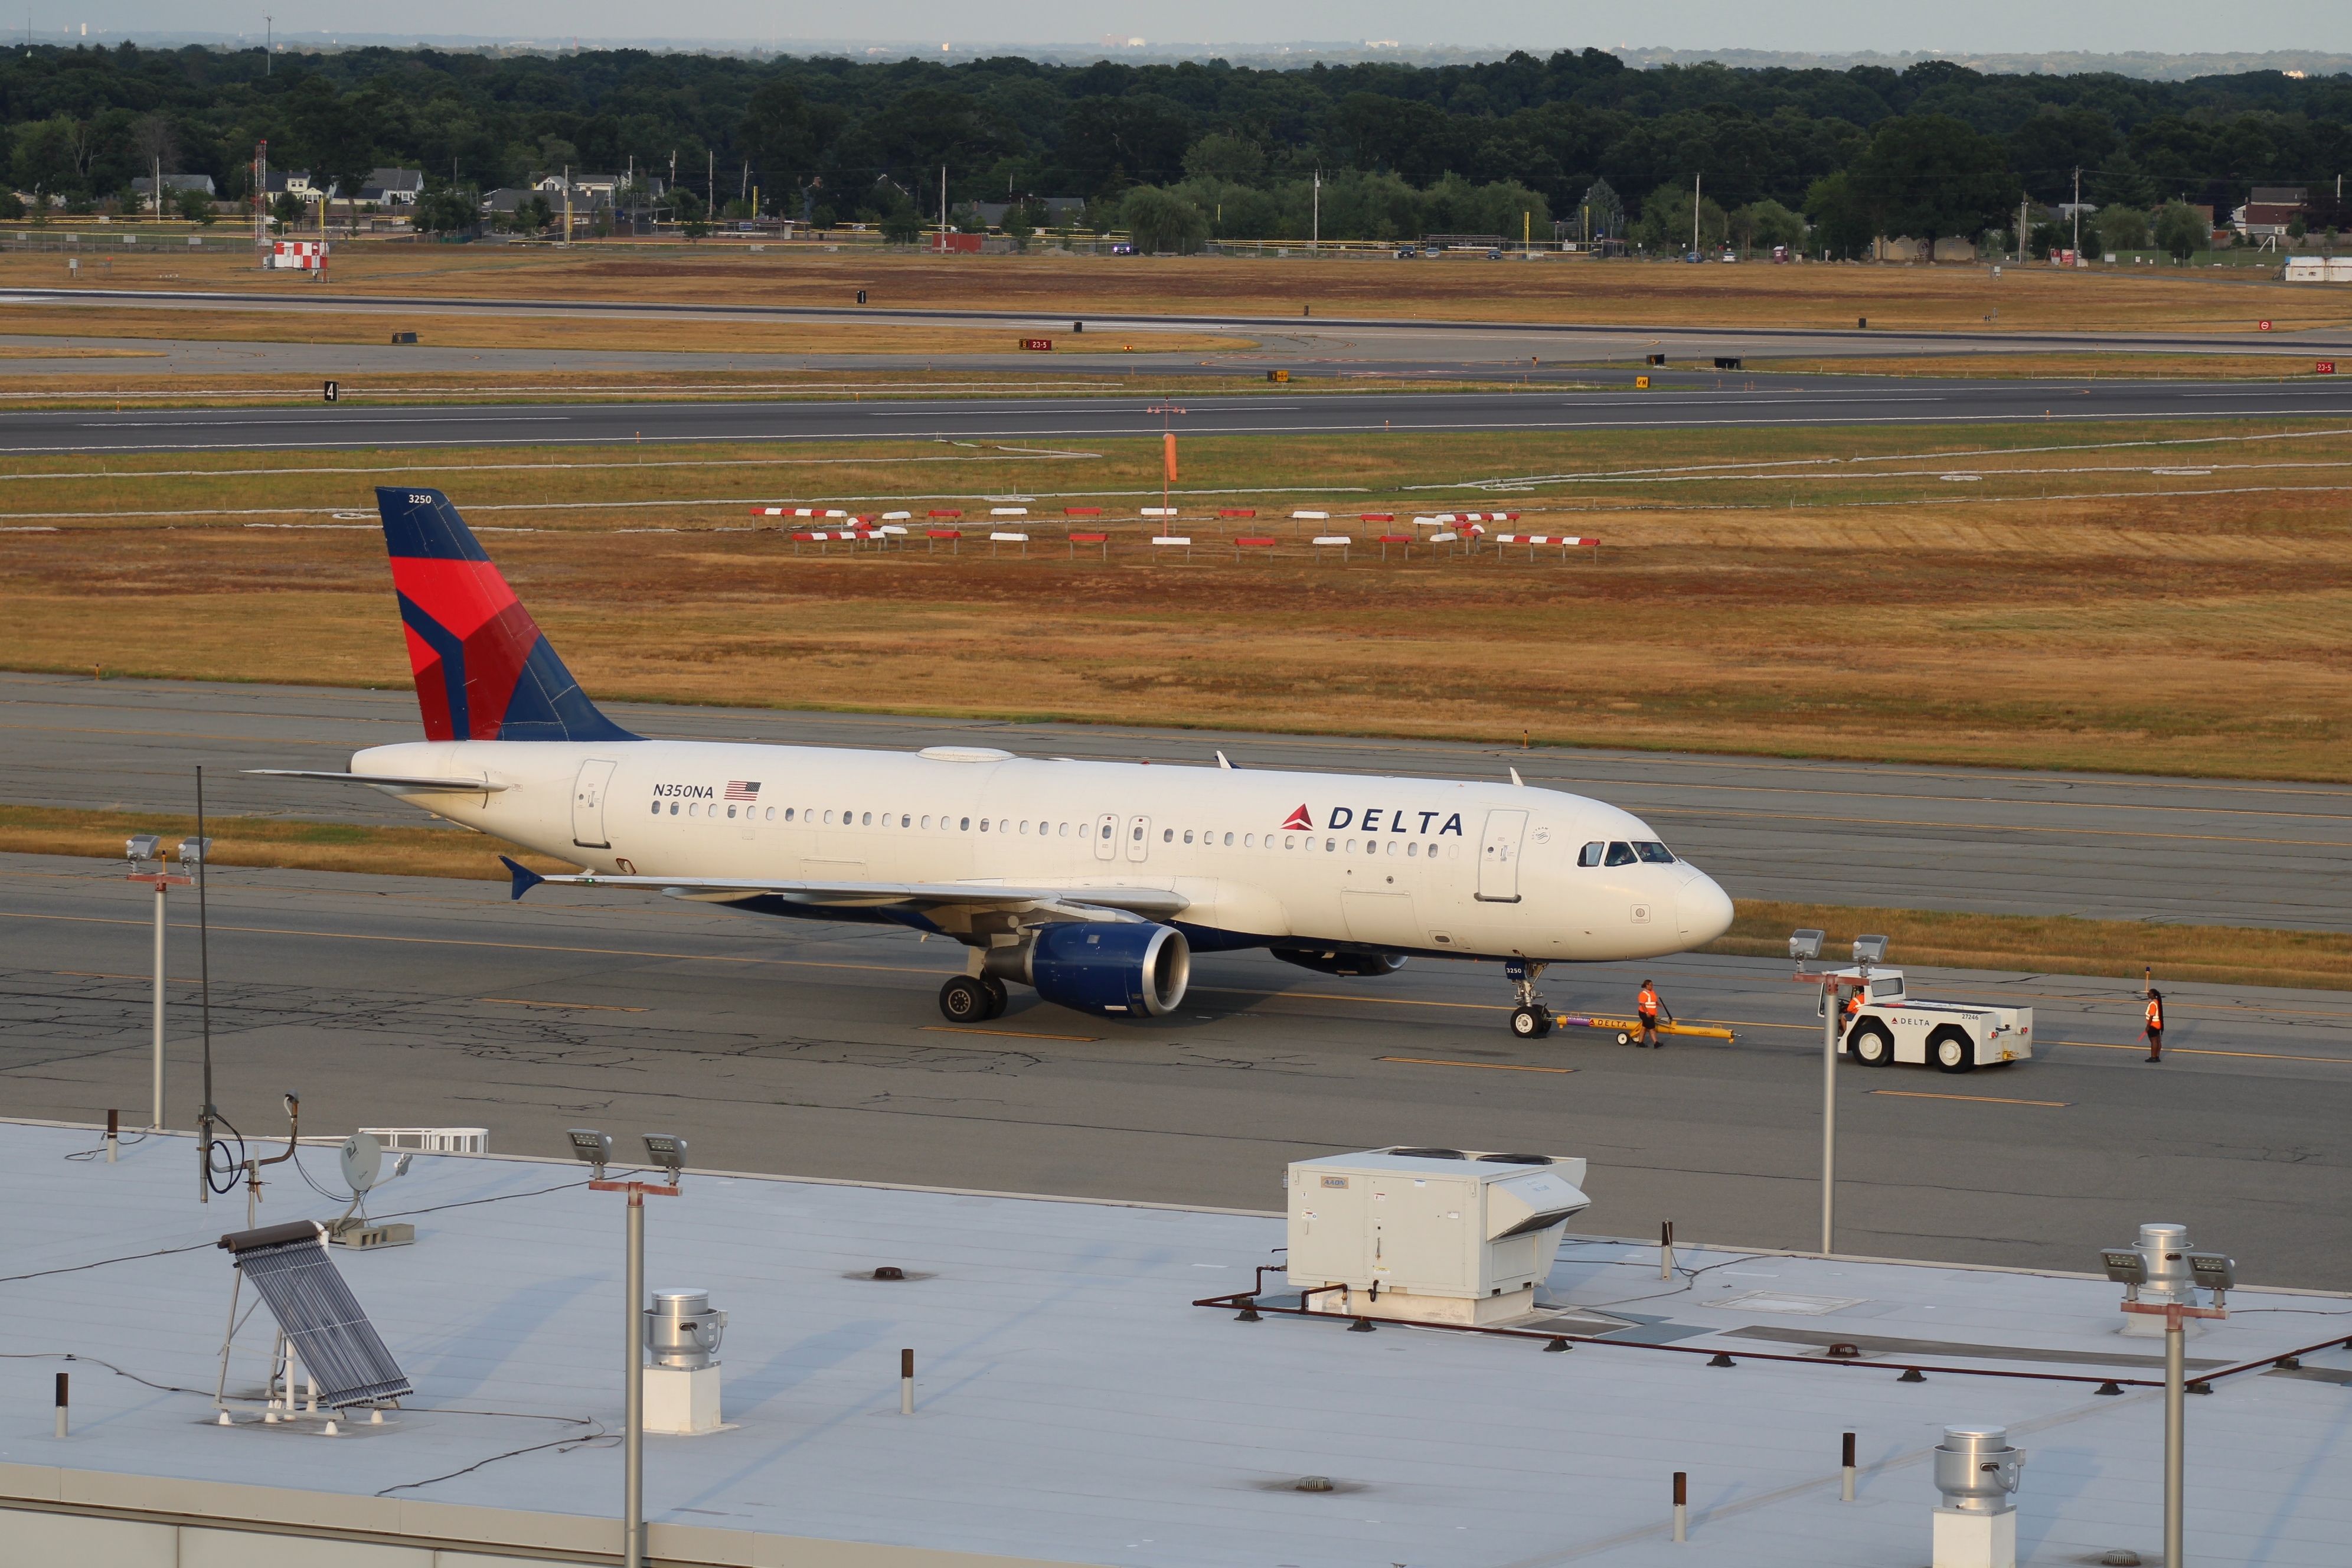 A Delta Air Lines Airbus A220-100 on an airport apron.